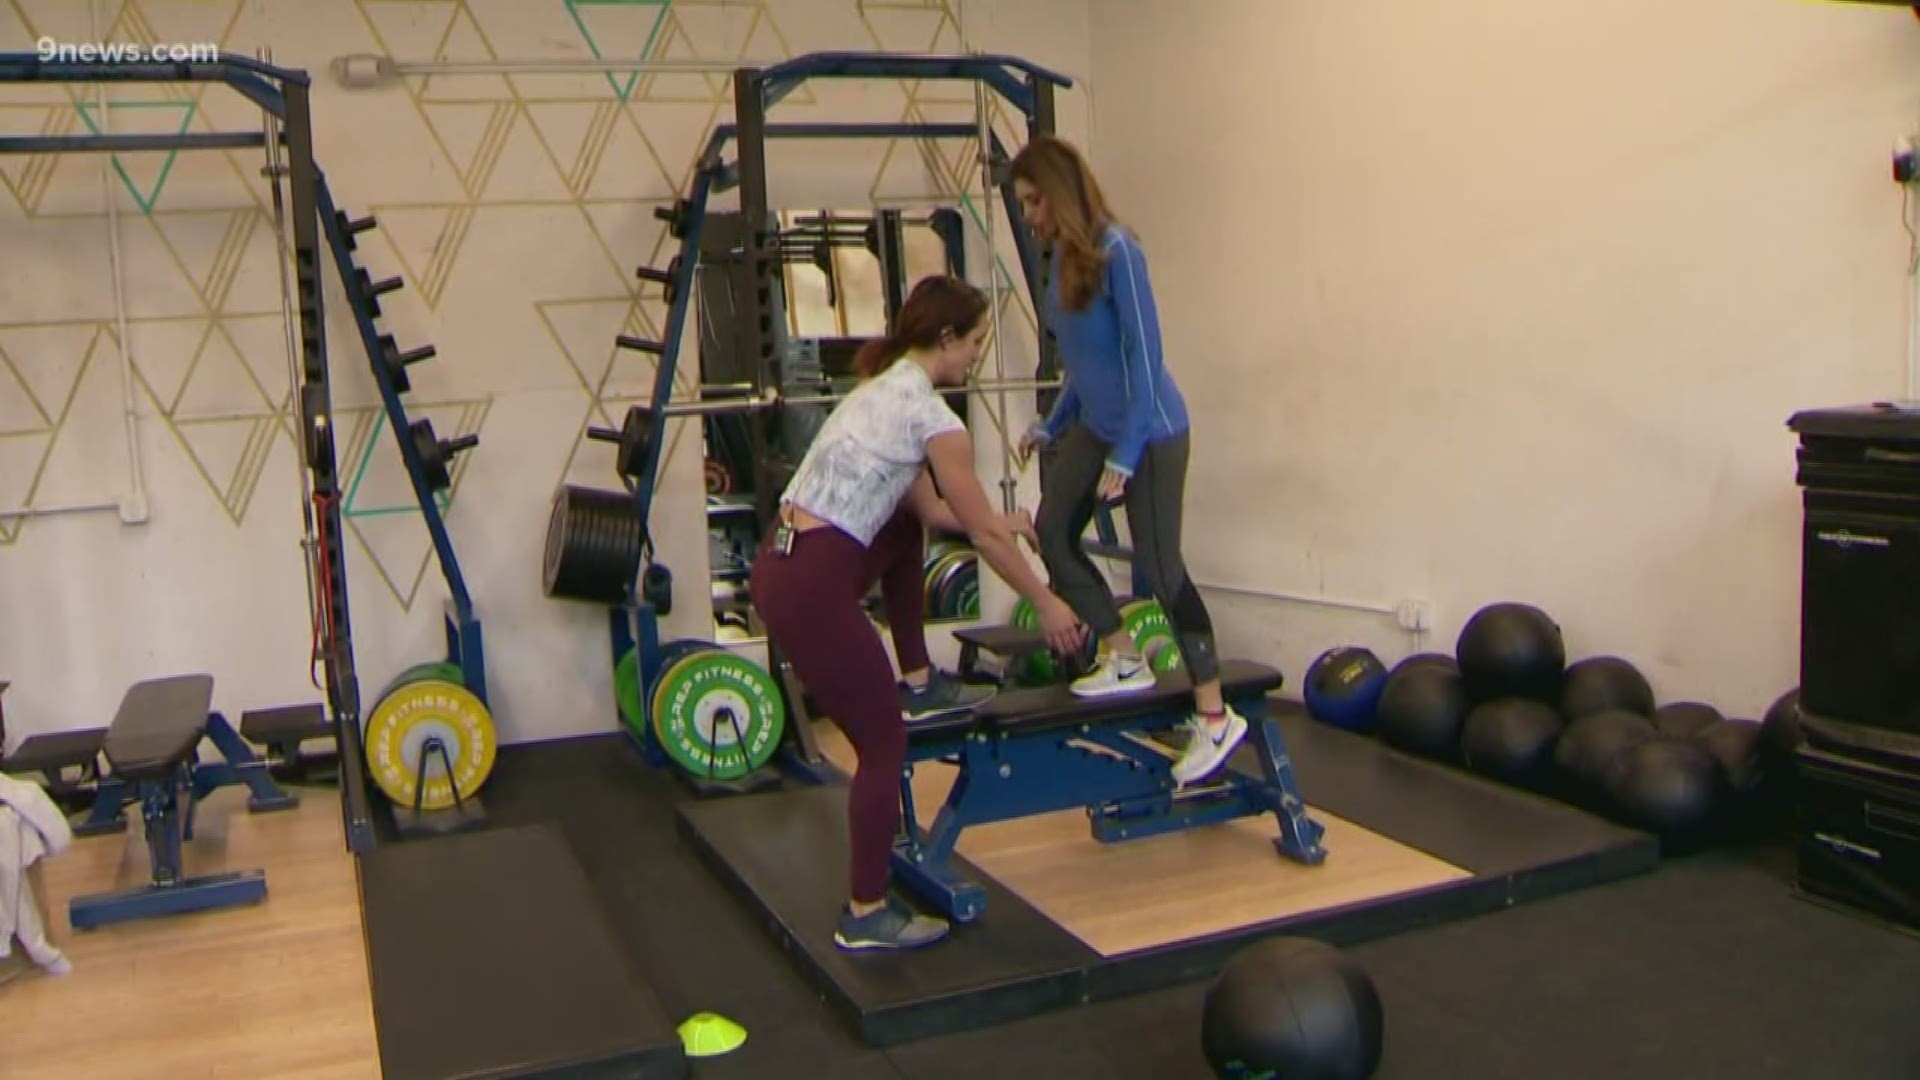 Fitness expert Emily Schromm joins us for this week's Workout Wednesday.